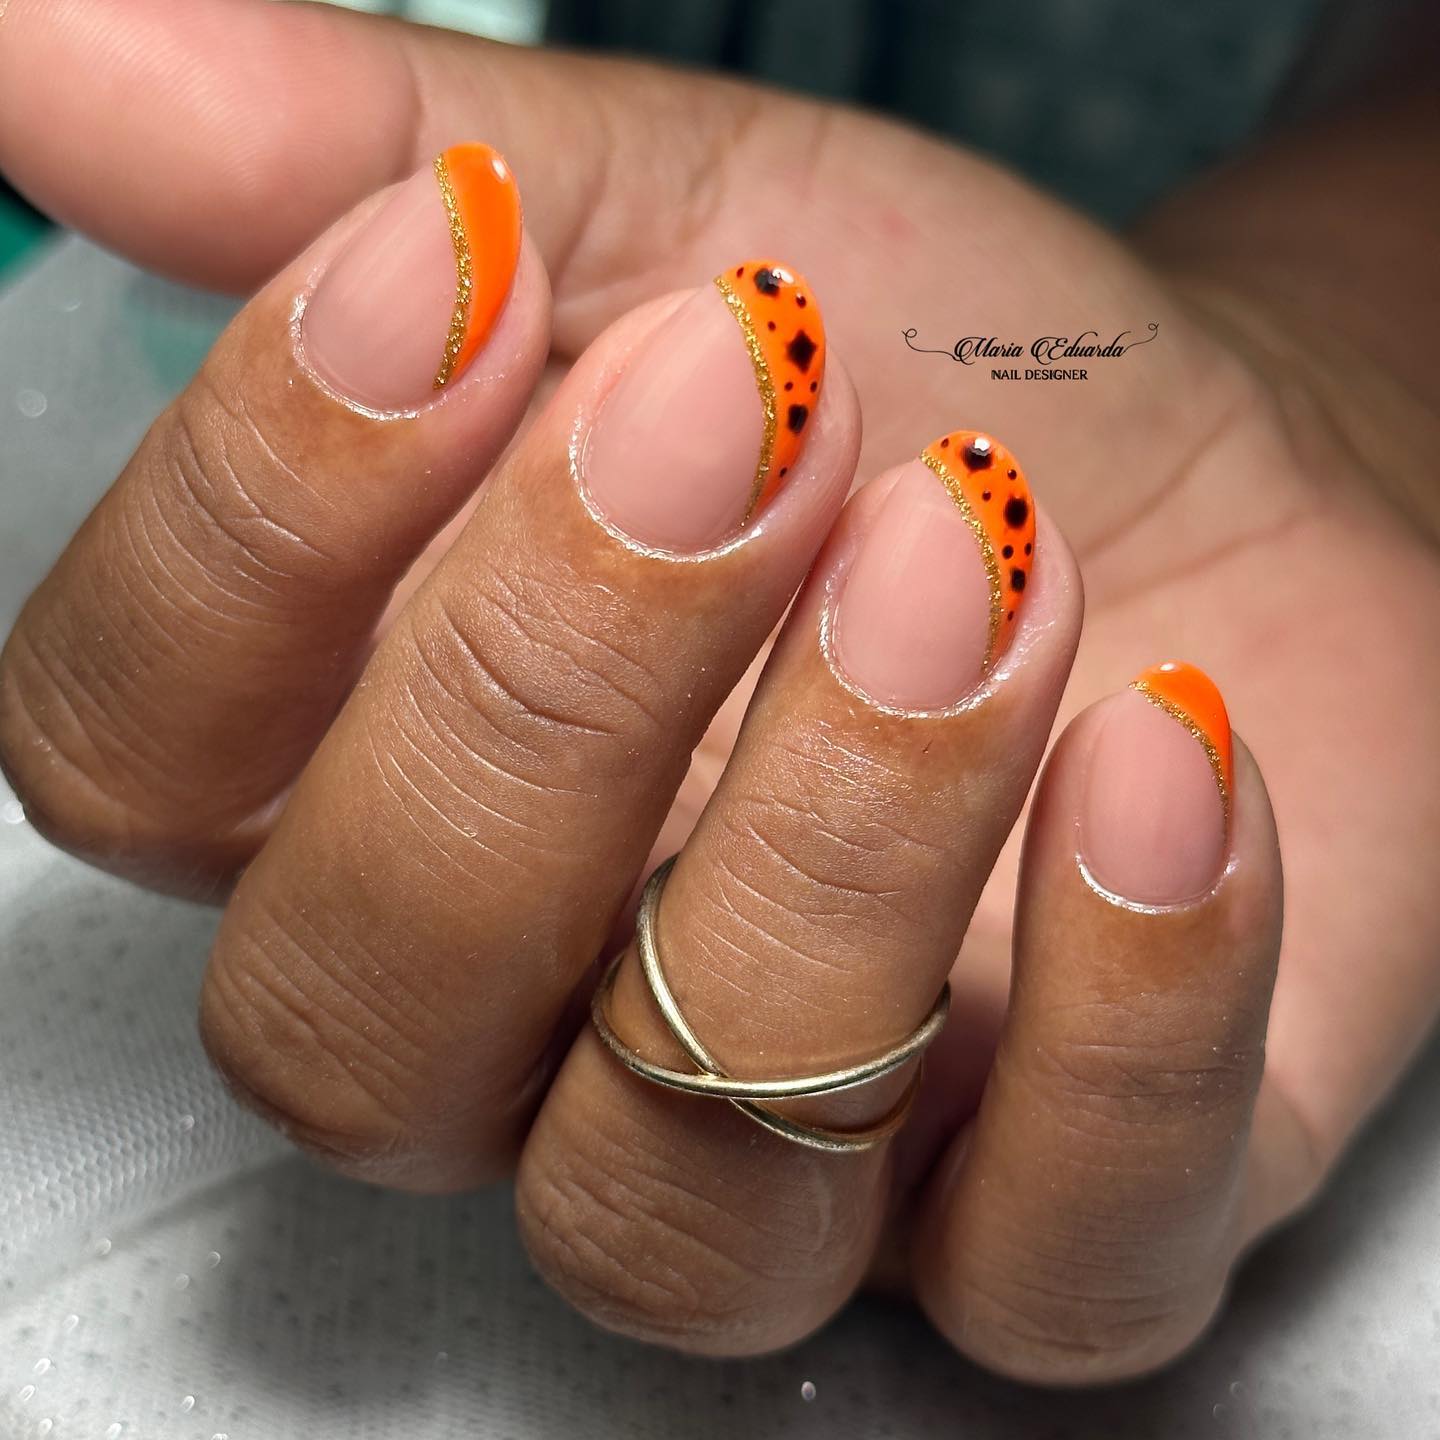 Playful Orange Tips with Glitter and Polka Dots